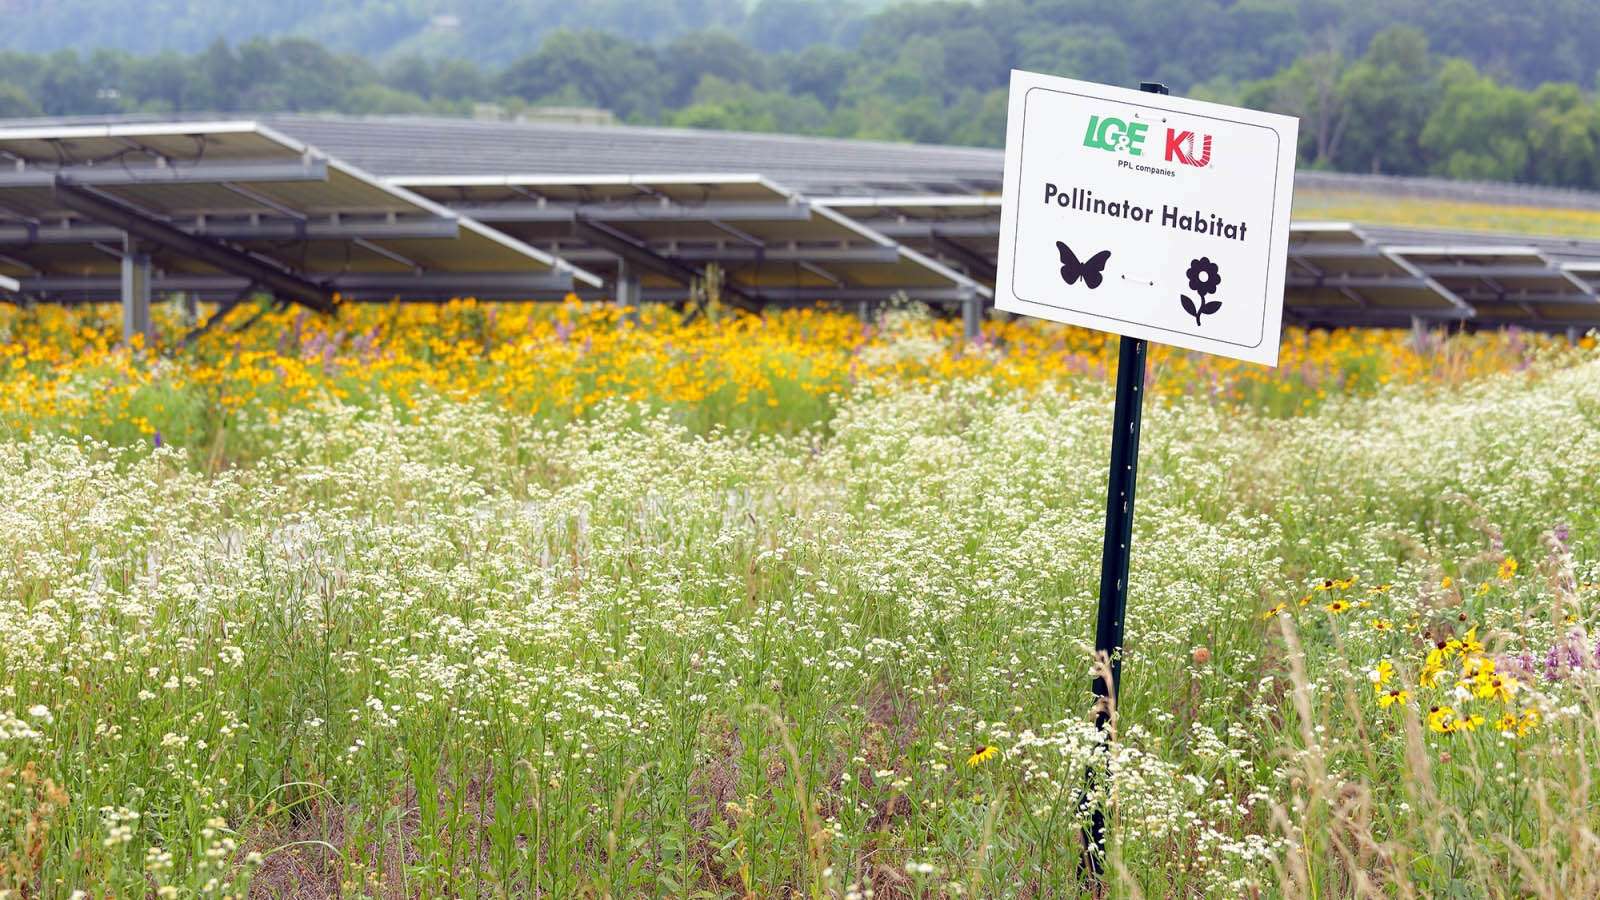 solar farm with wildflowers and pollinator habitat sign in foreground